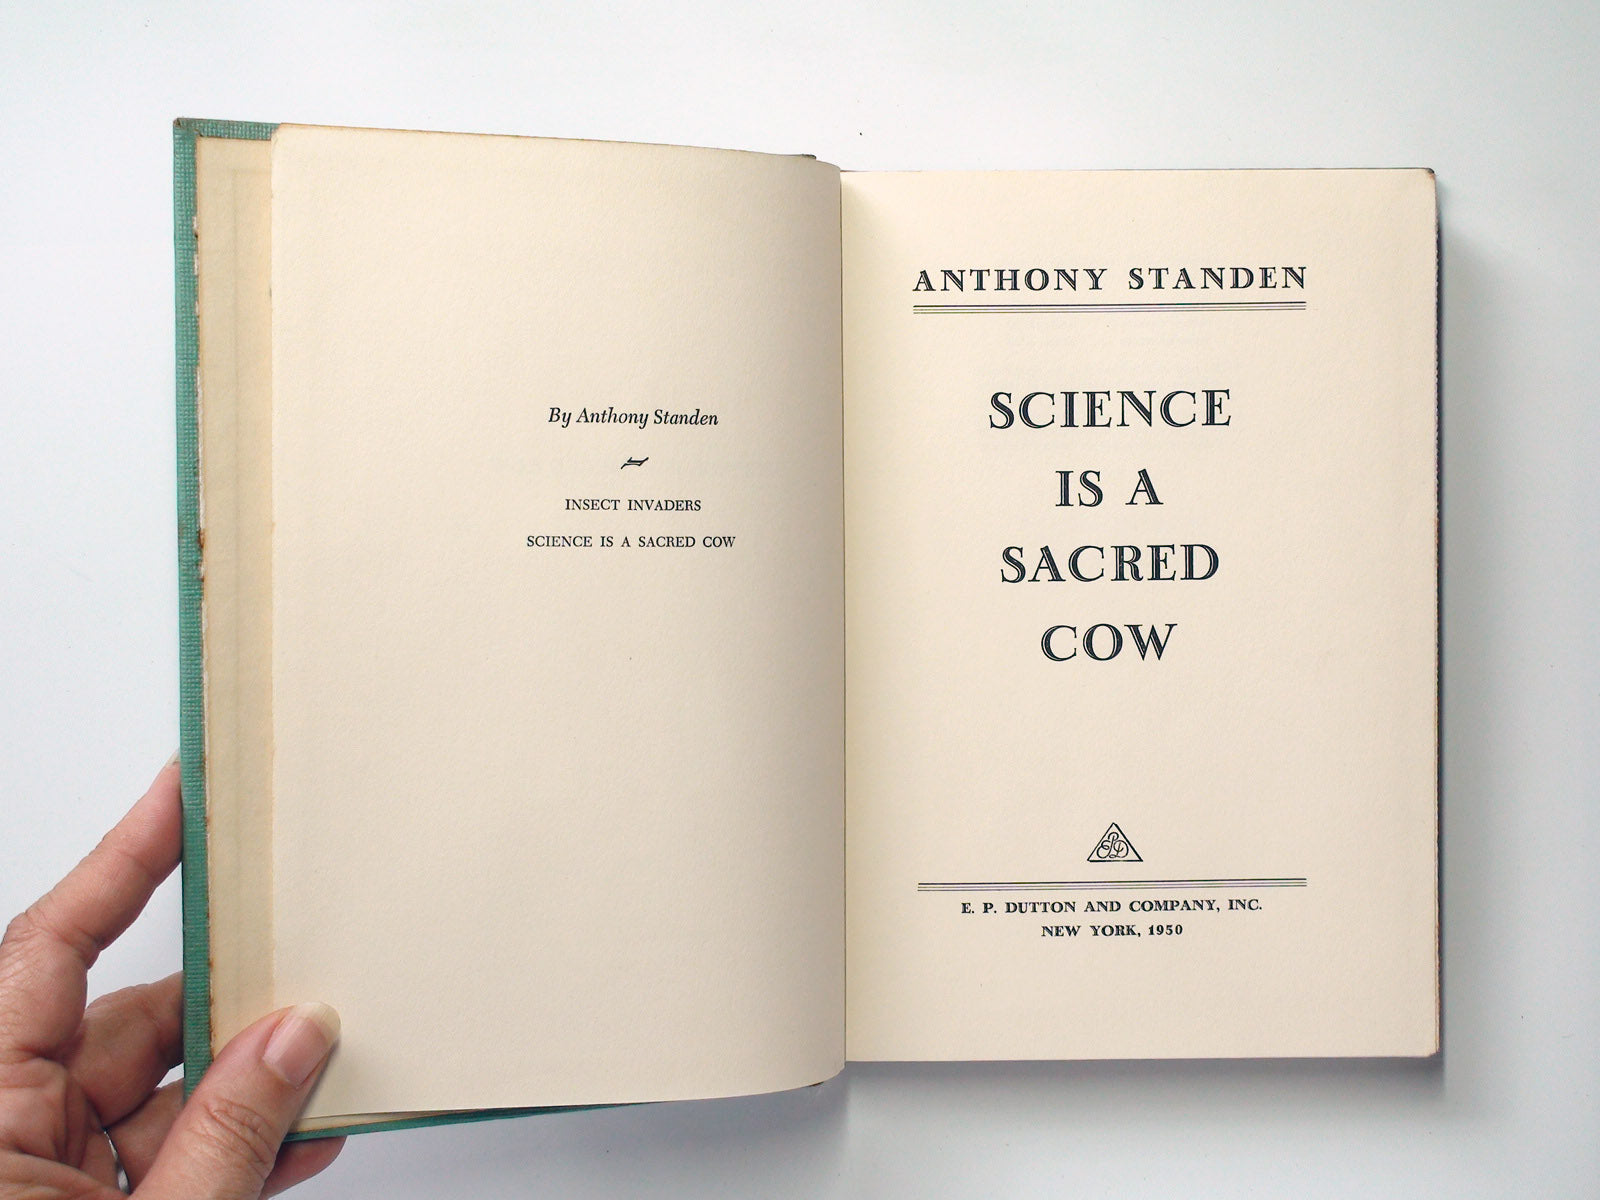 Science is a Sacred Cow, Anthony Standen, 3rd Printing, No Dust Jacket, 1950